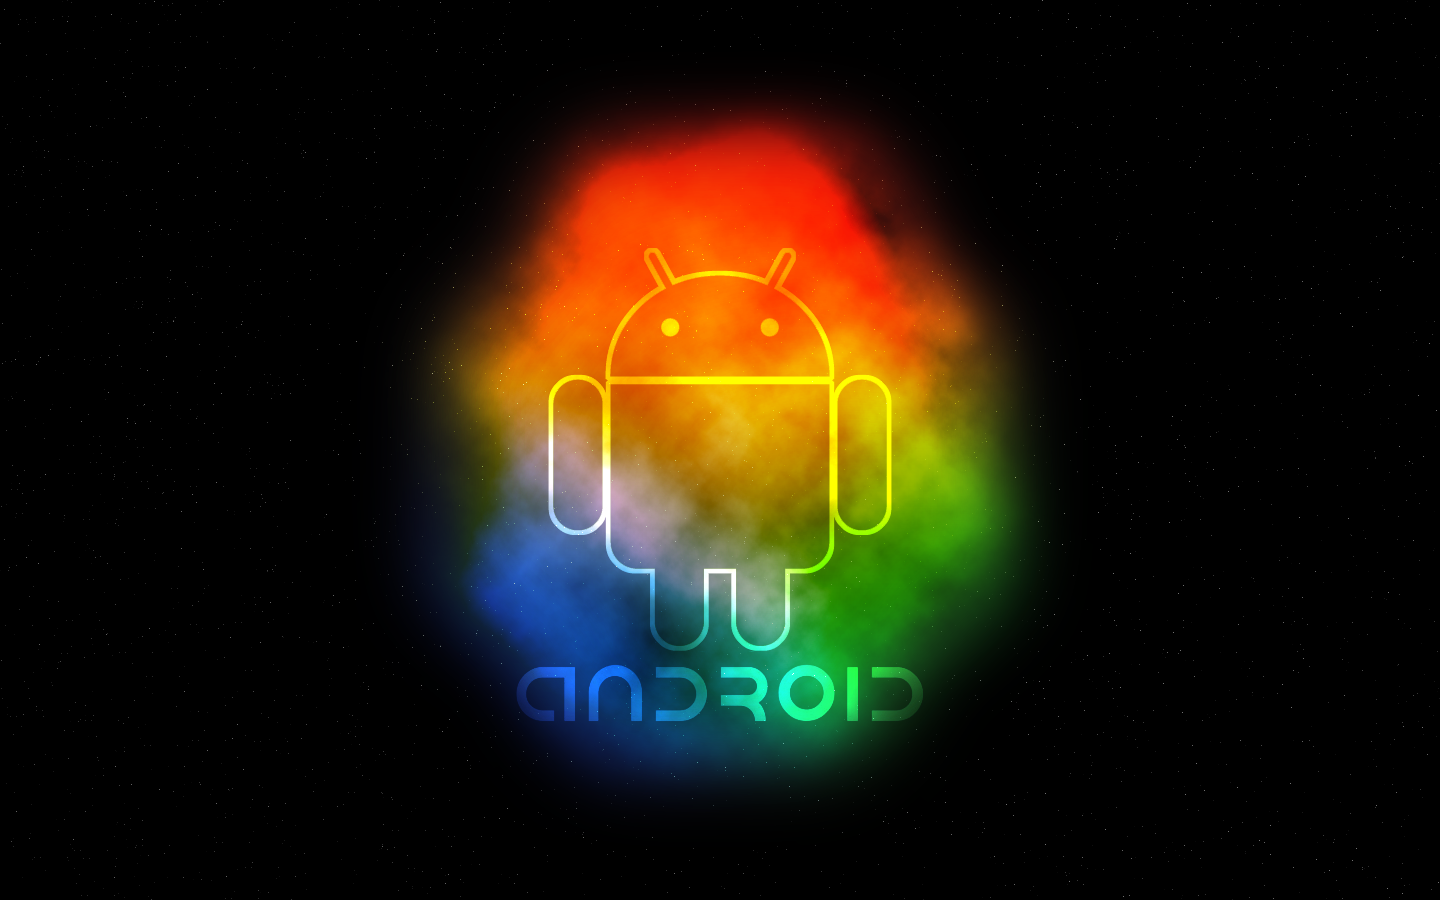 Android Wallpaper By Lucidfusion On Dev ドロイドくん Bugdroid 壁紙 動画 画像集 高画質あり Naver まとめ